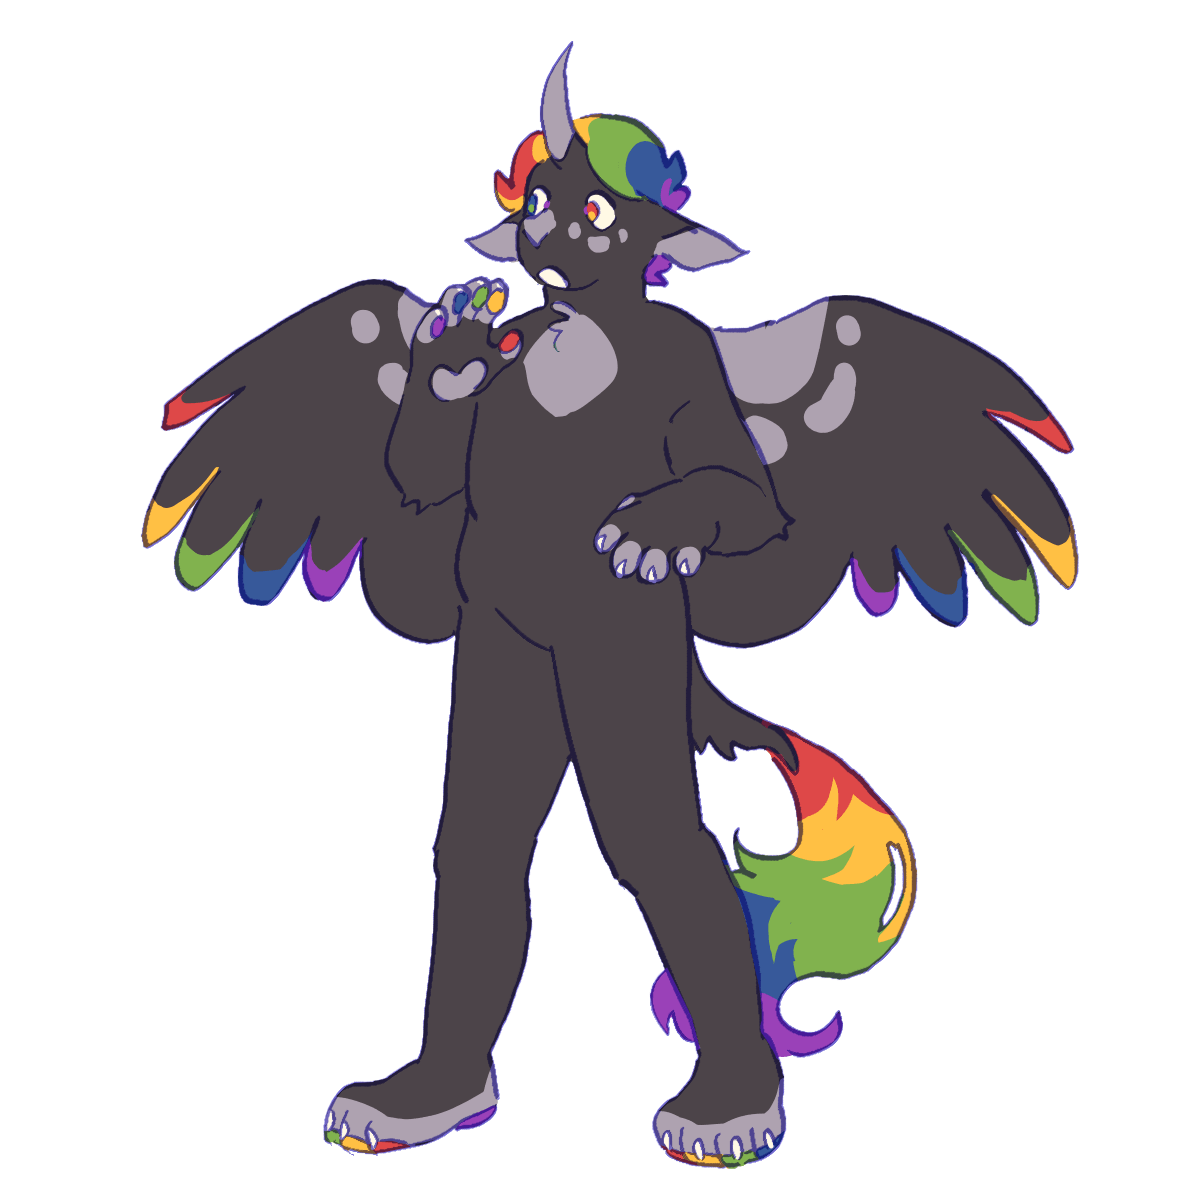 a picture of a character with dark gray fur with lighter markings, a unicorn horn, and feathery wings. she has rainbow hair and feathertips.